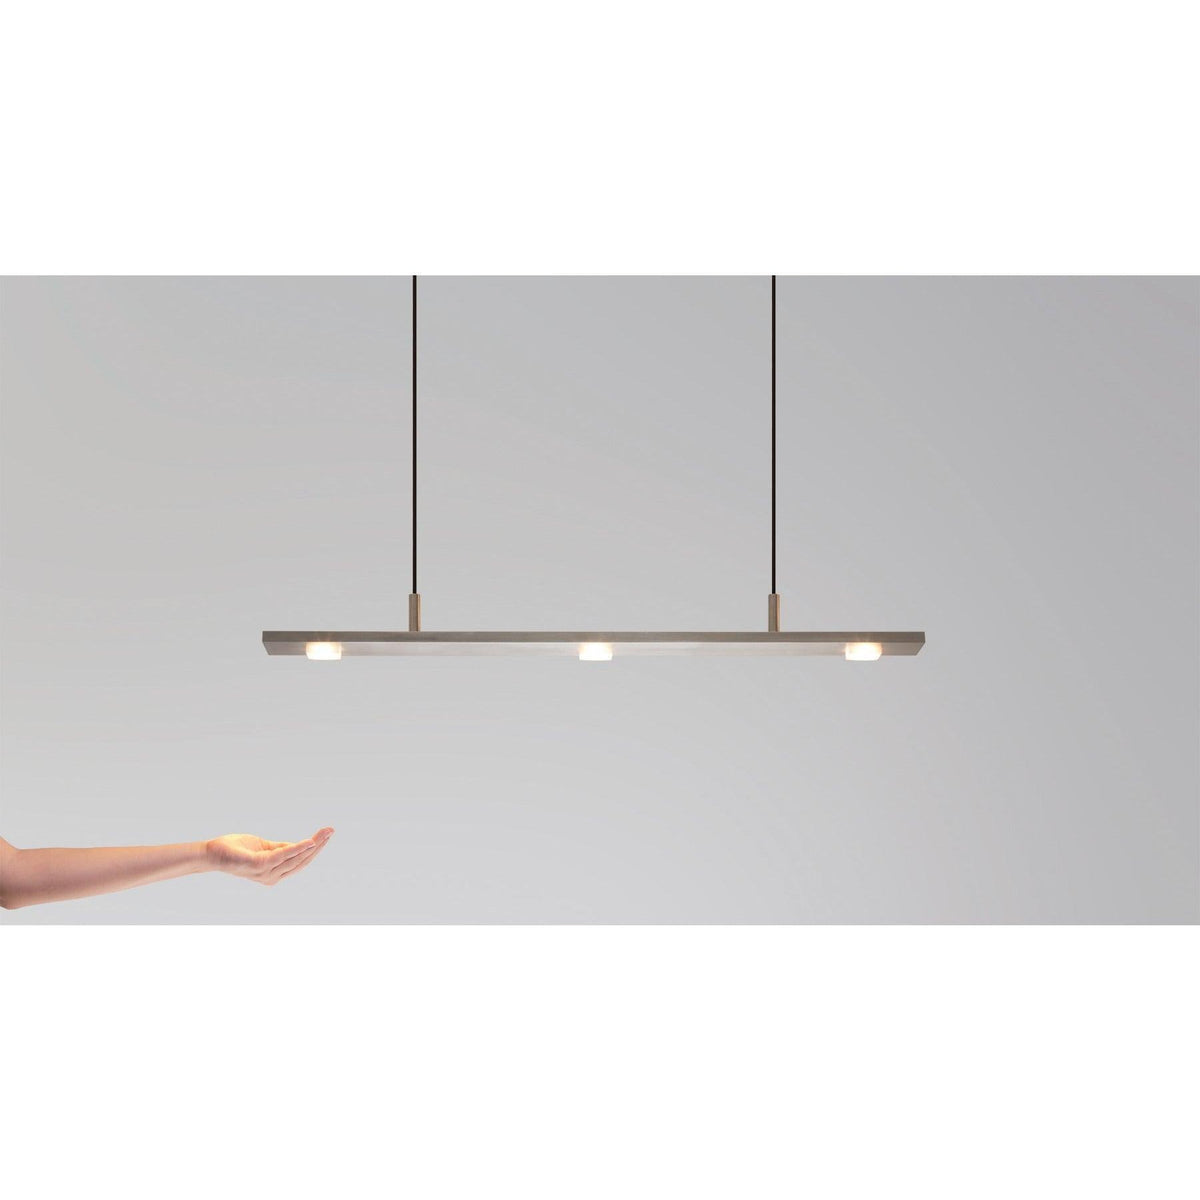 Cerno - Brevis LED Linear Pendant - 06-910-A-27P1 | Montreal Lighting & Hardware